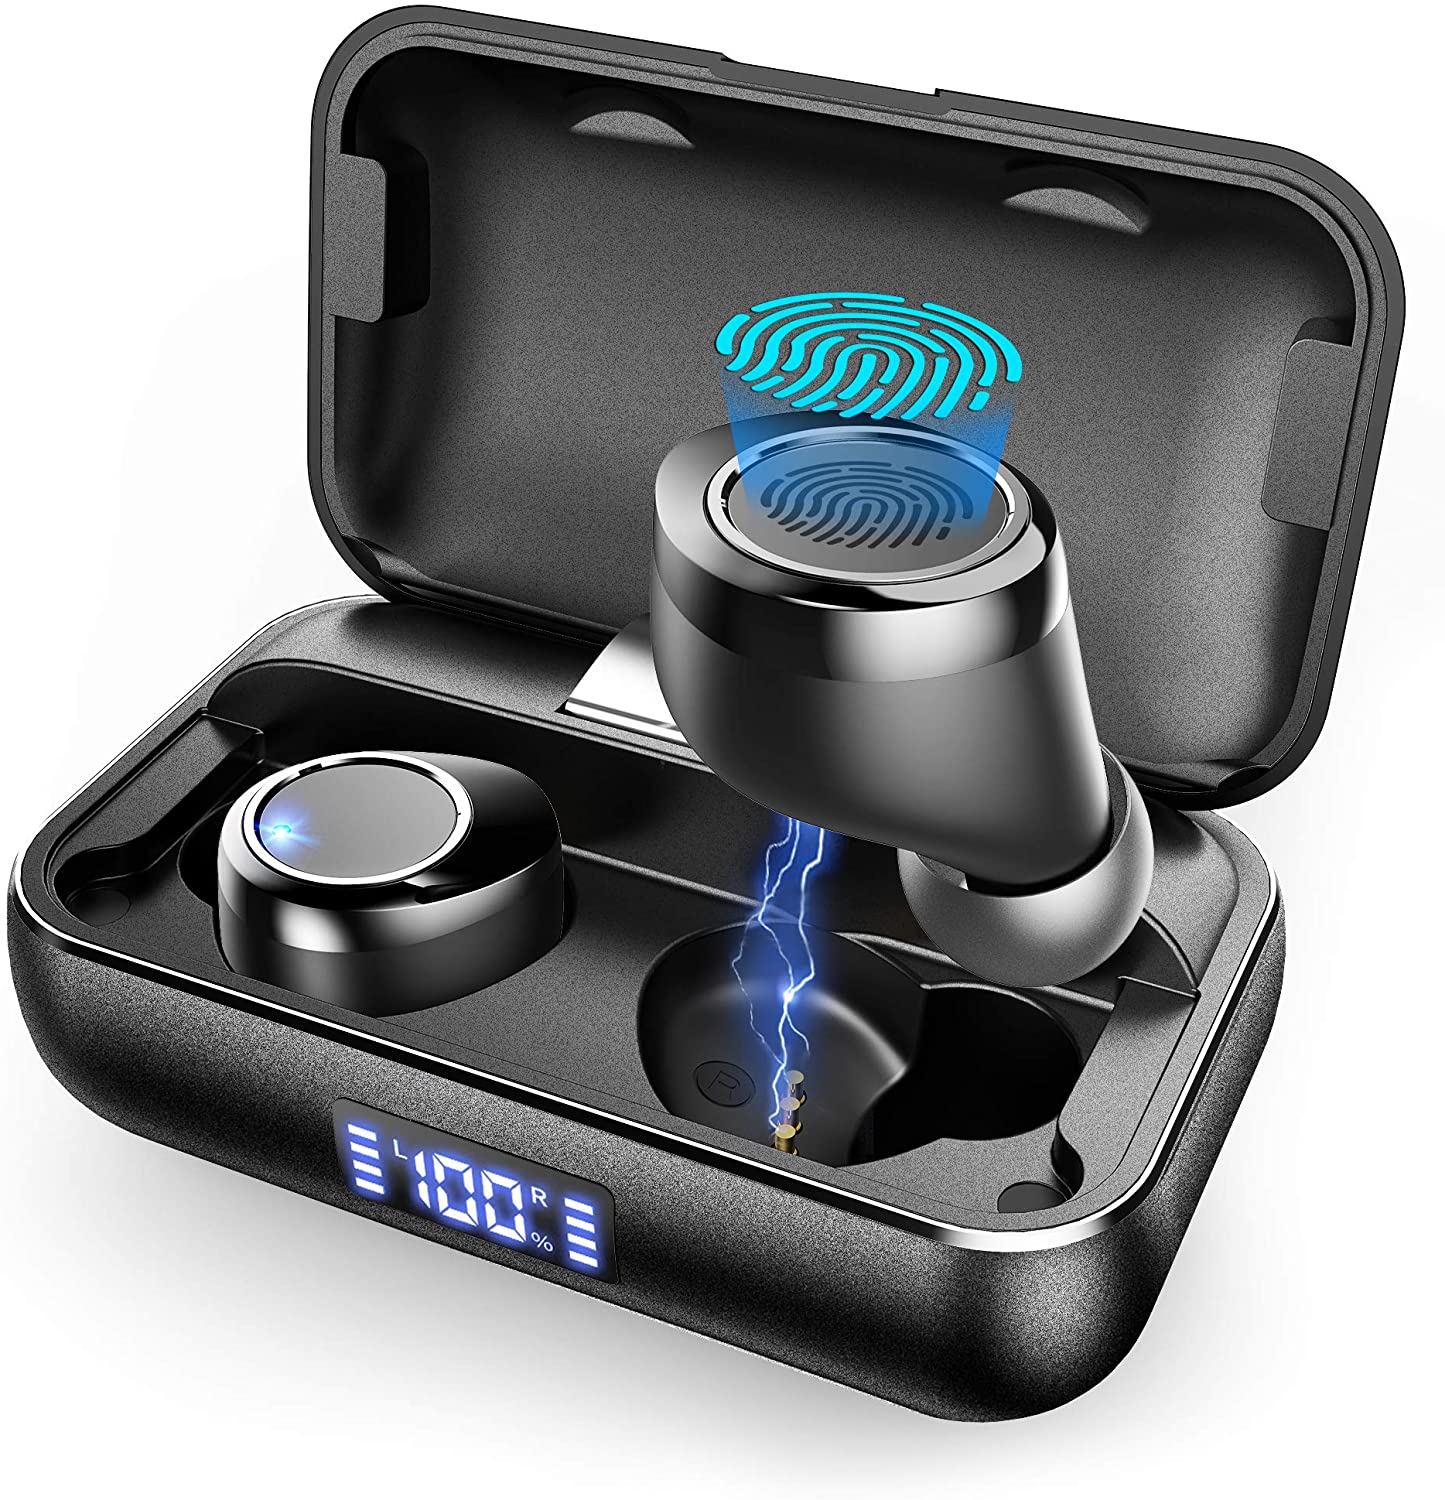 Top 5 best wireless and Bluetooth earbuds under 30, 25 in 2020